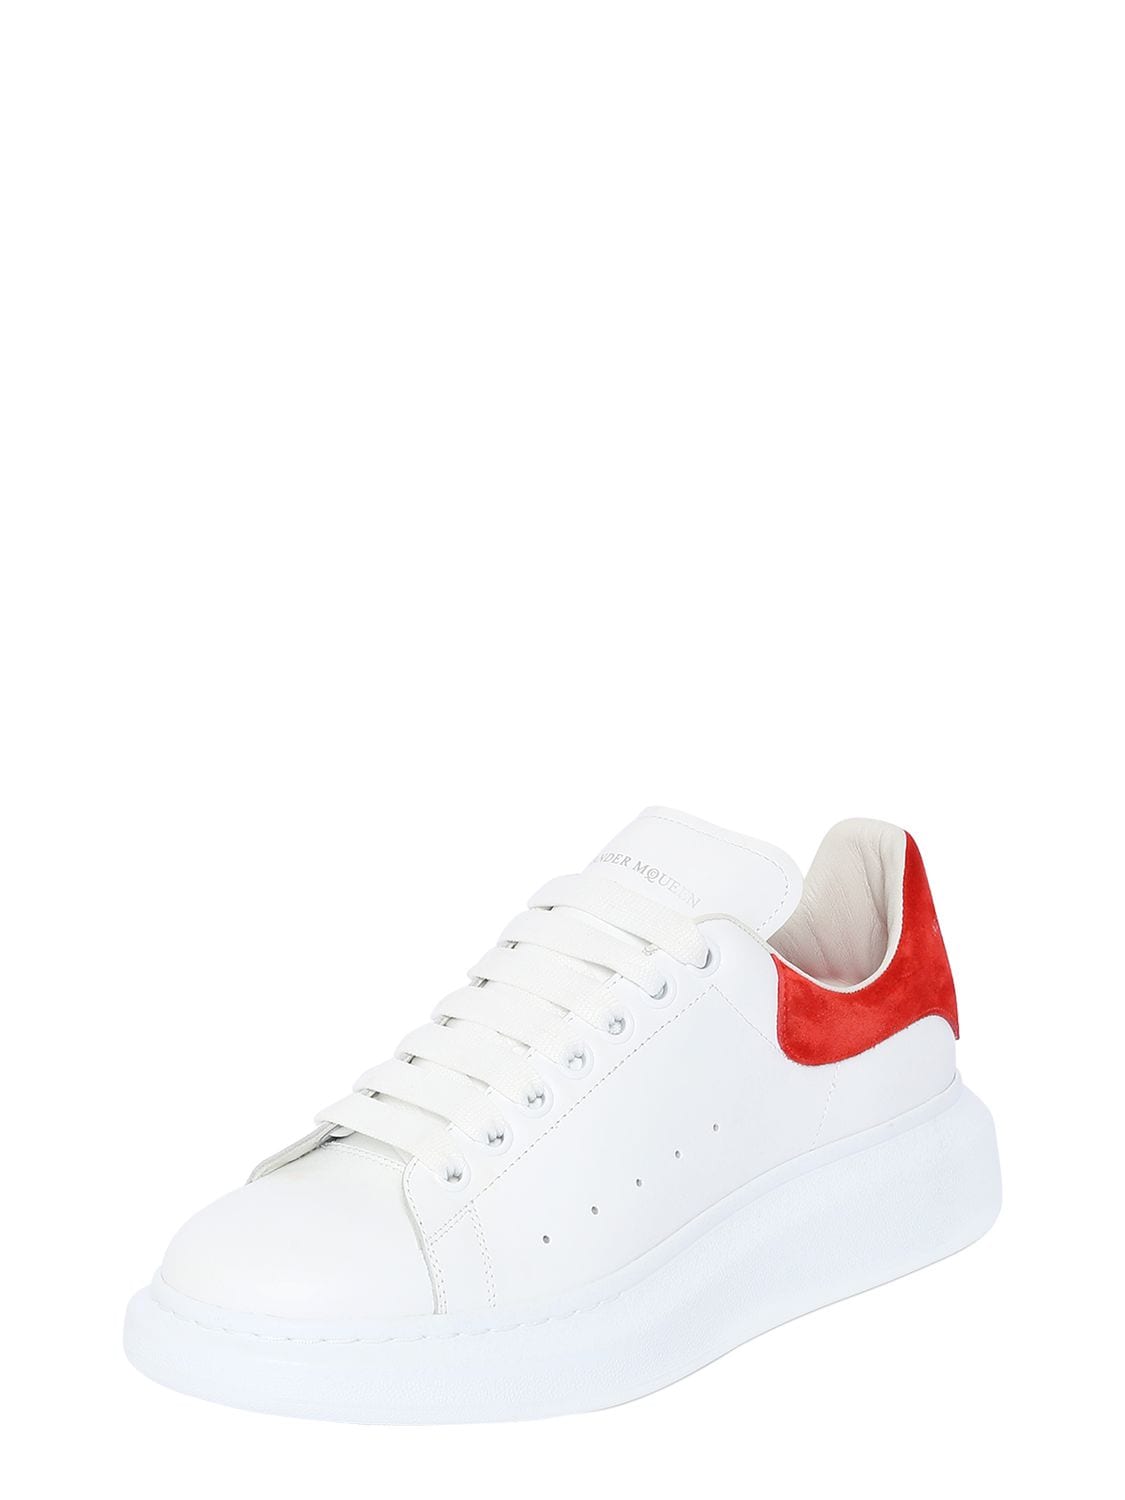 Shop Alexander Mcqueen 45mm Leather Sneakers In White,red